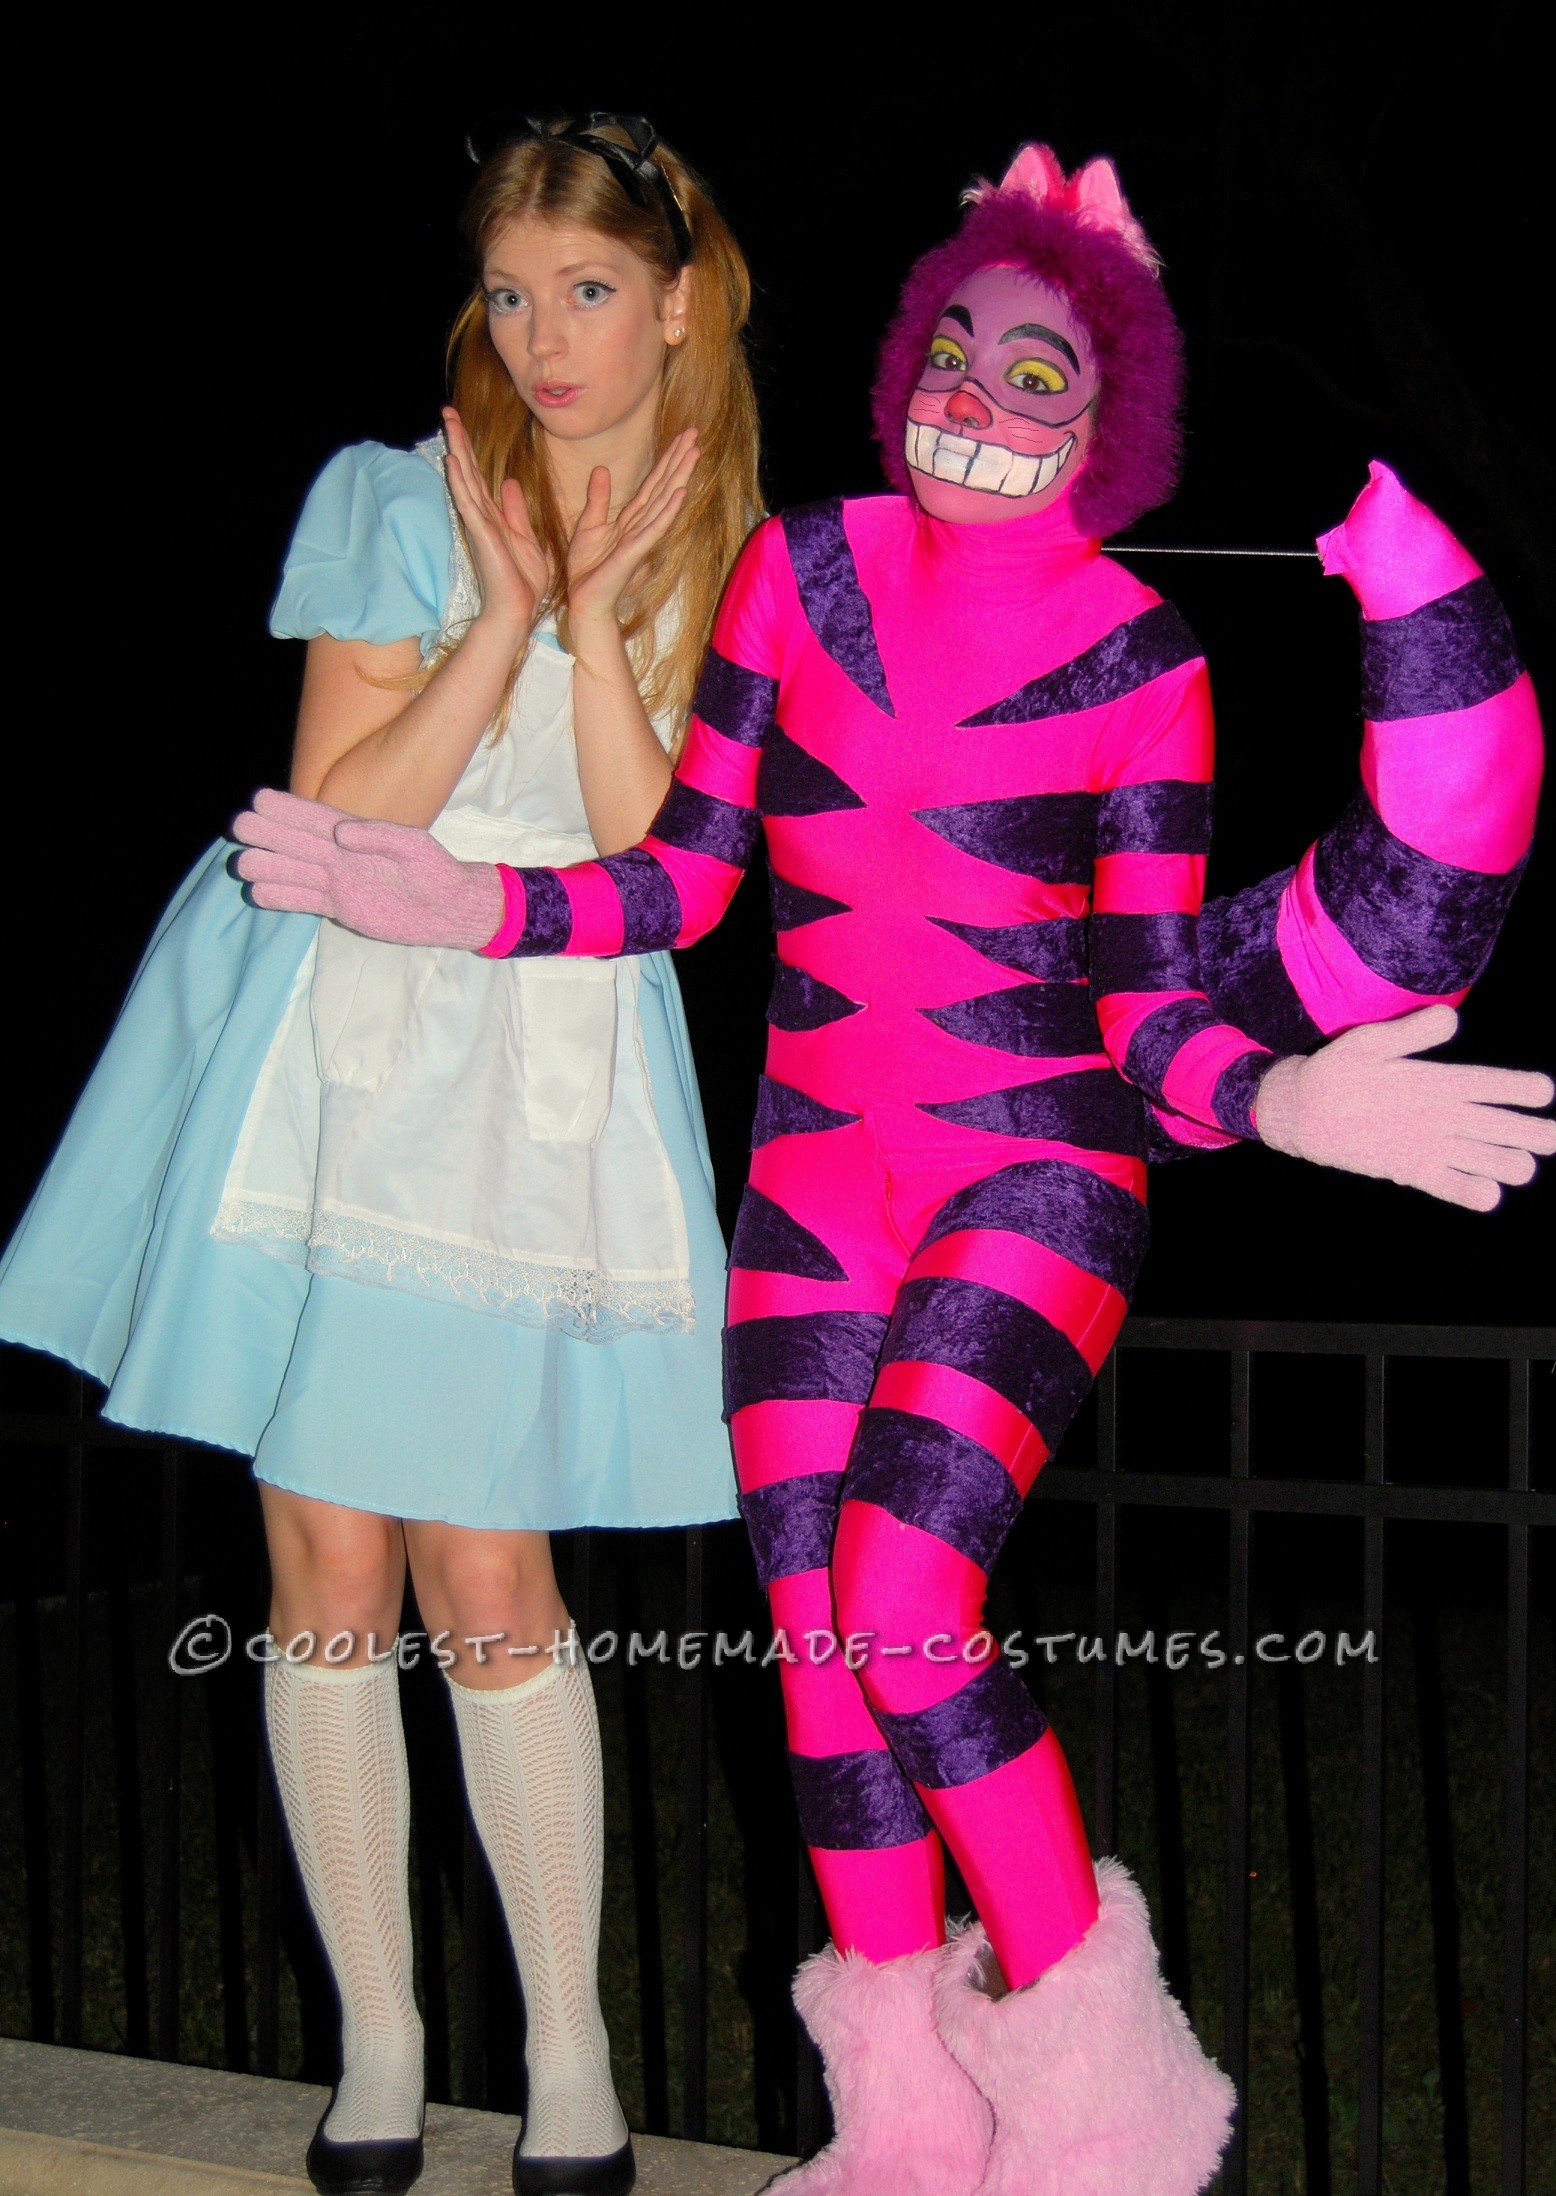 For a whole year I had planned to create my own Cheshire Cat costume for Halloween 2012. After two days of creation, my vision CAME TO LIFE, and turn